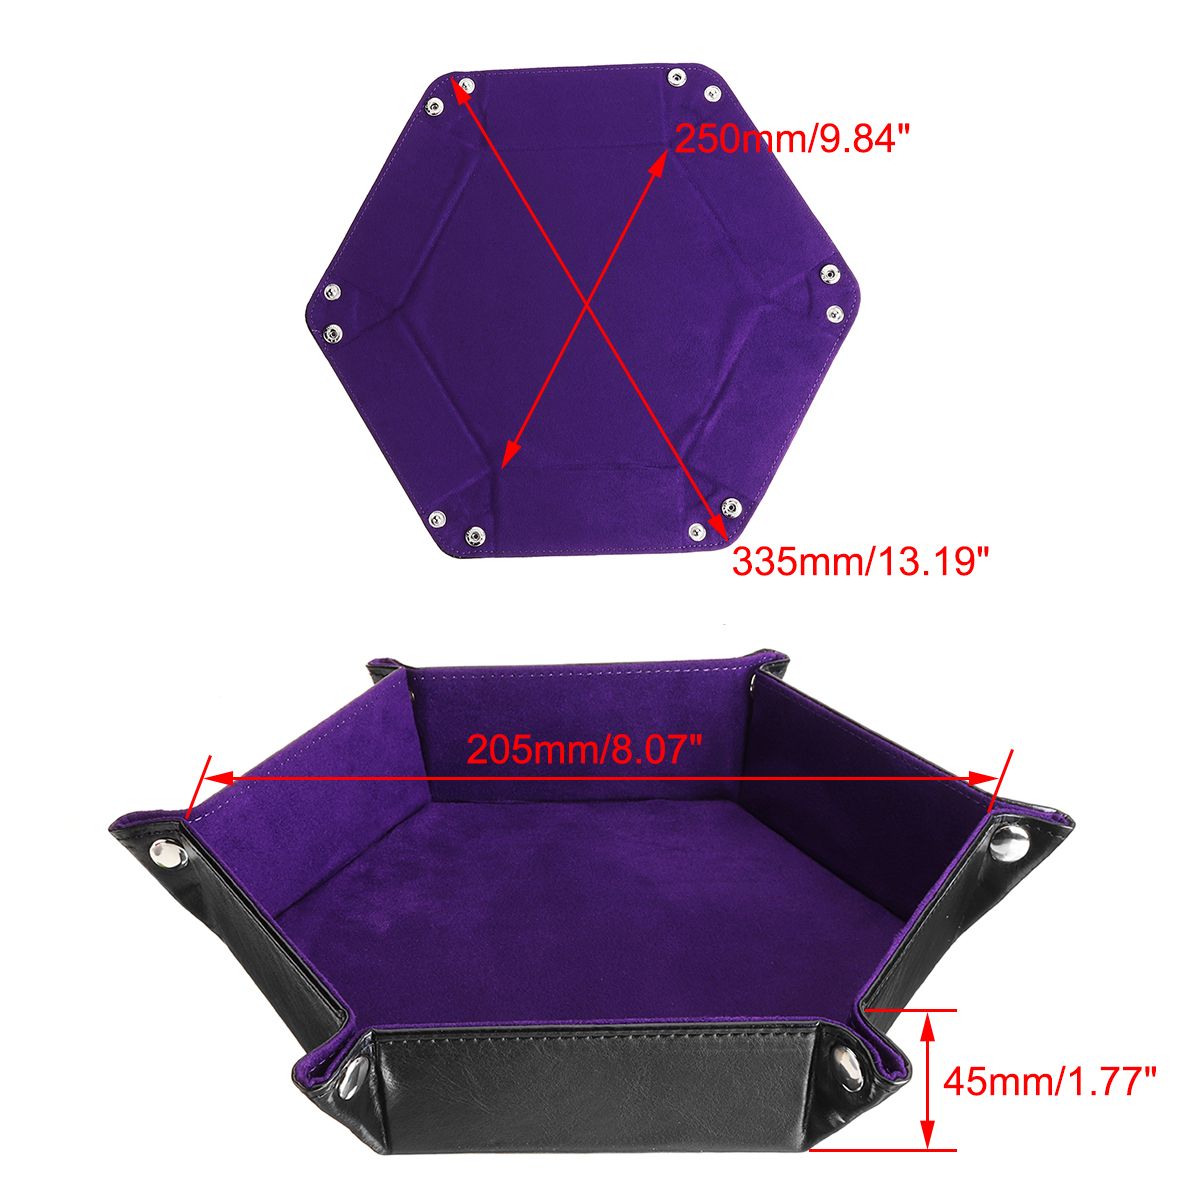 Multisided-Dices-Set-Holder-Polyhedral-Dices-Purple-PU-Leather-Tray-for-RPG-1373171